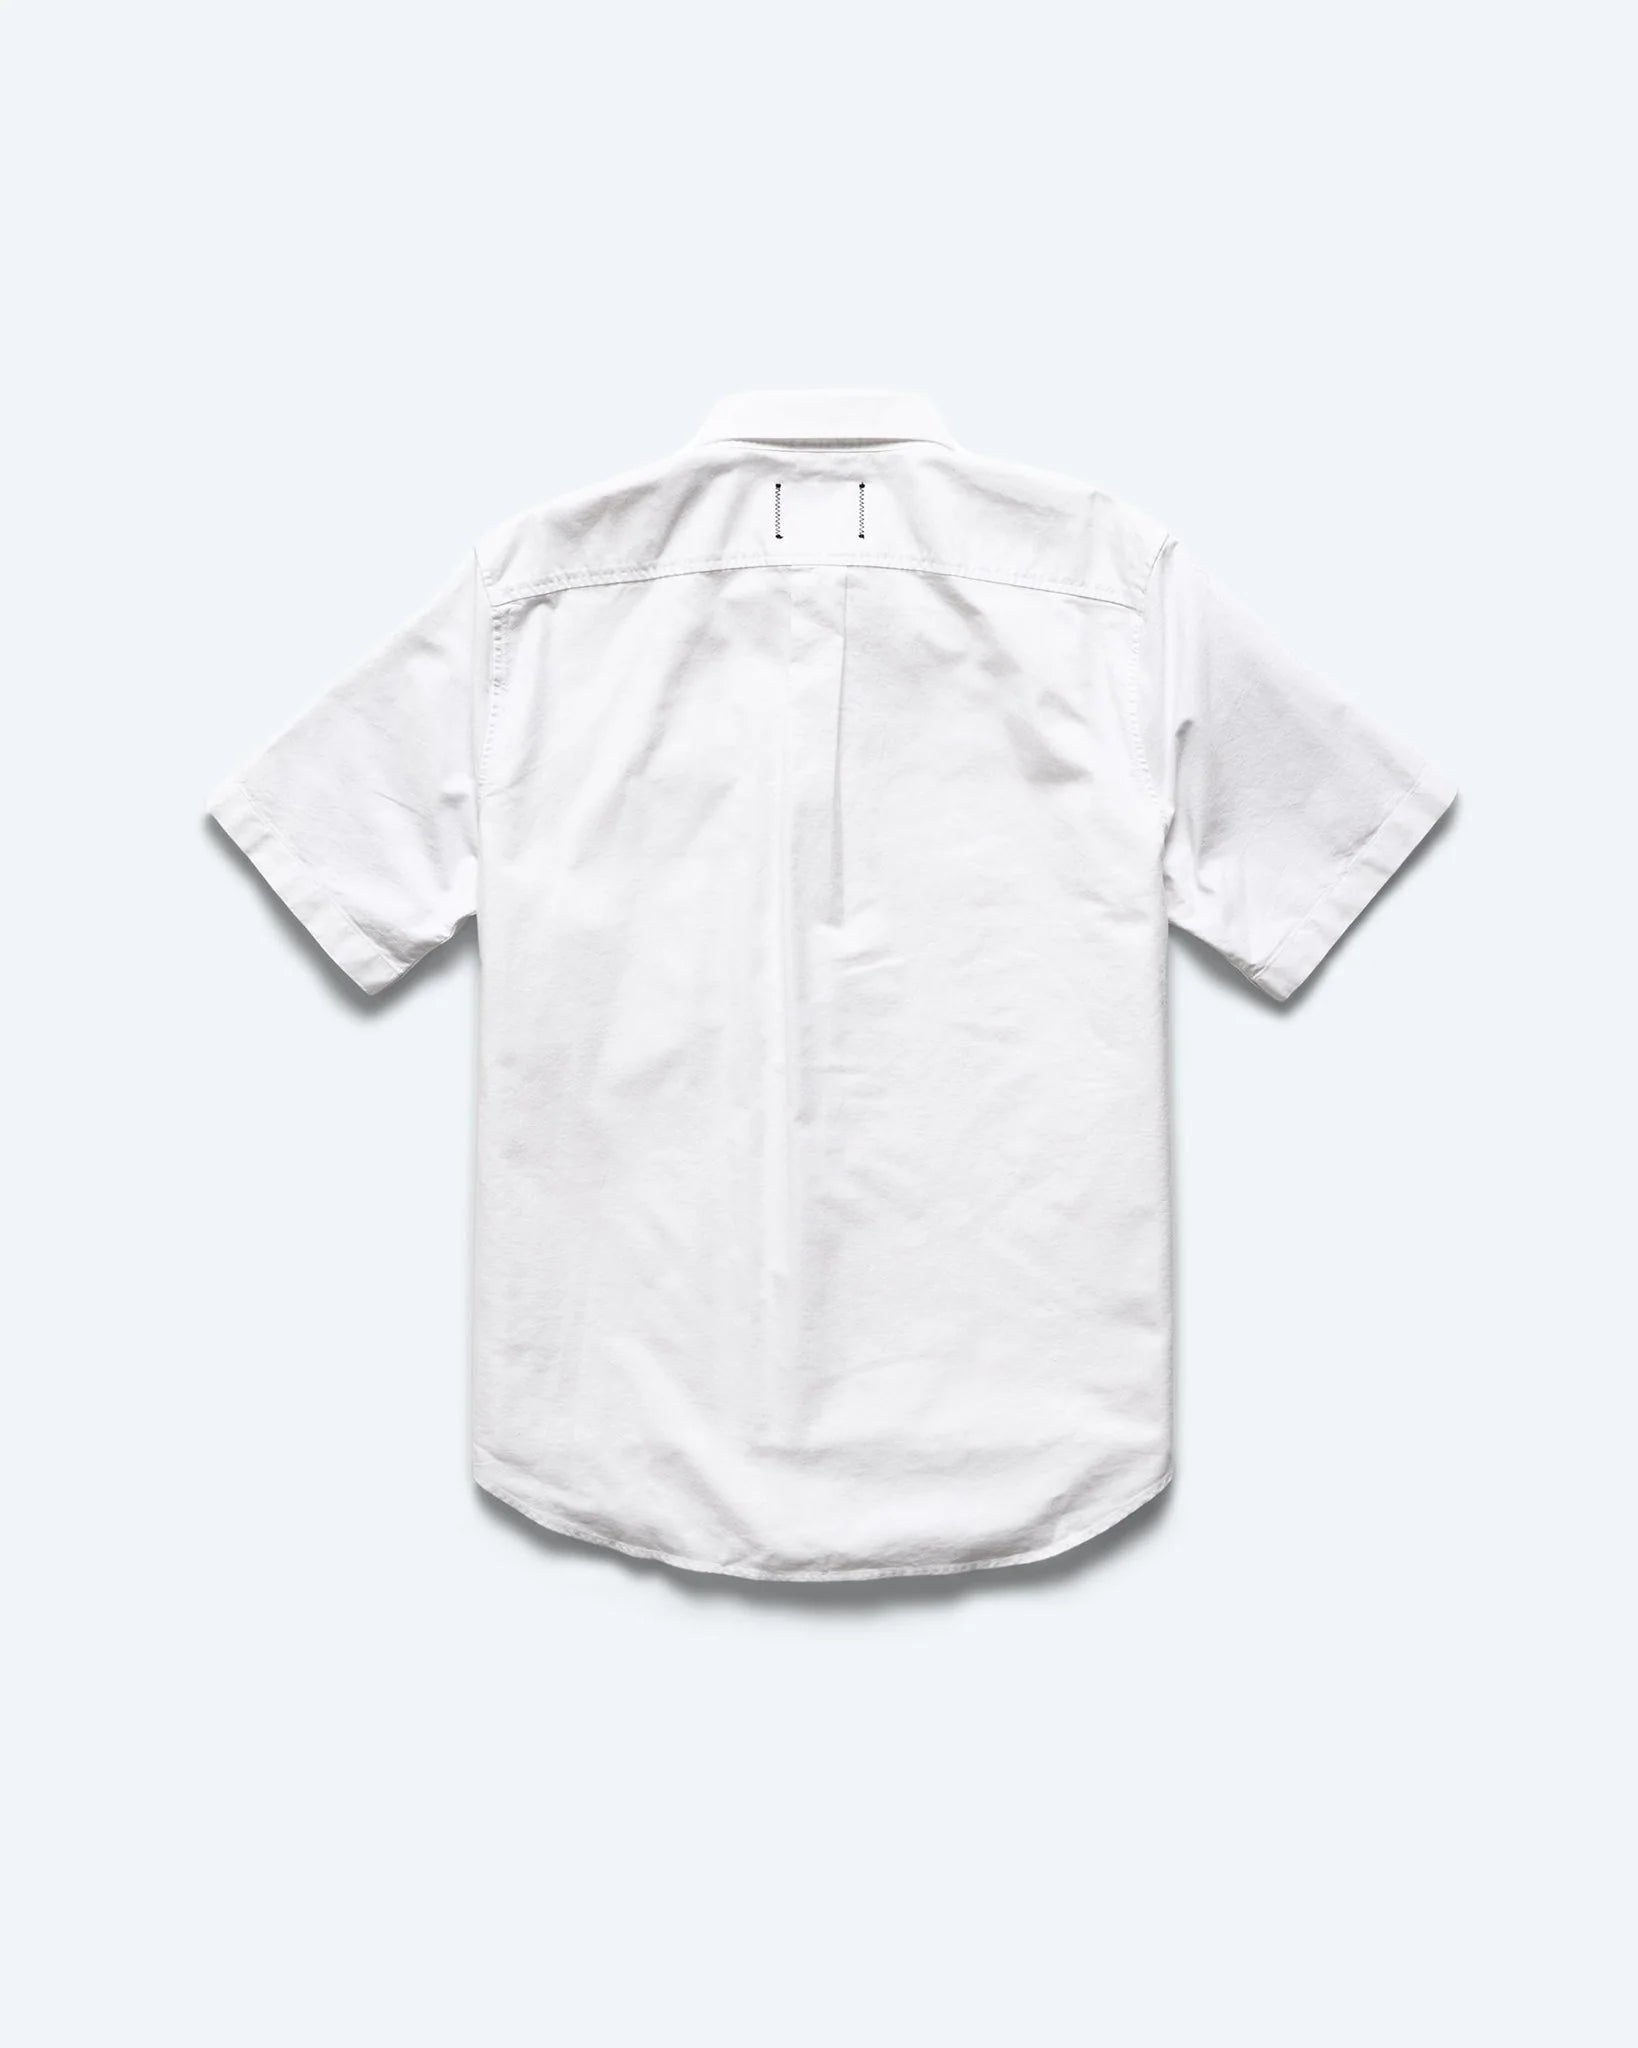 Reigning Champ Windsor S/S Oxford Shirt in White